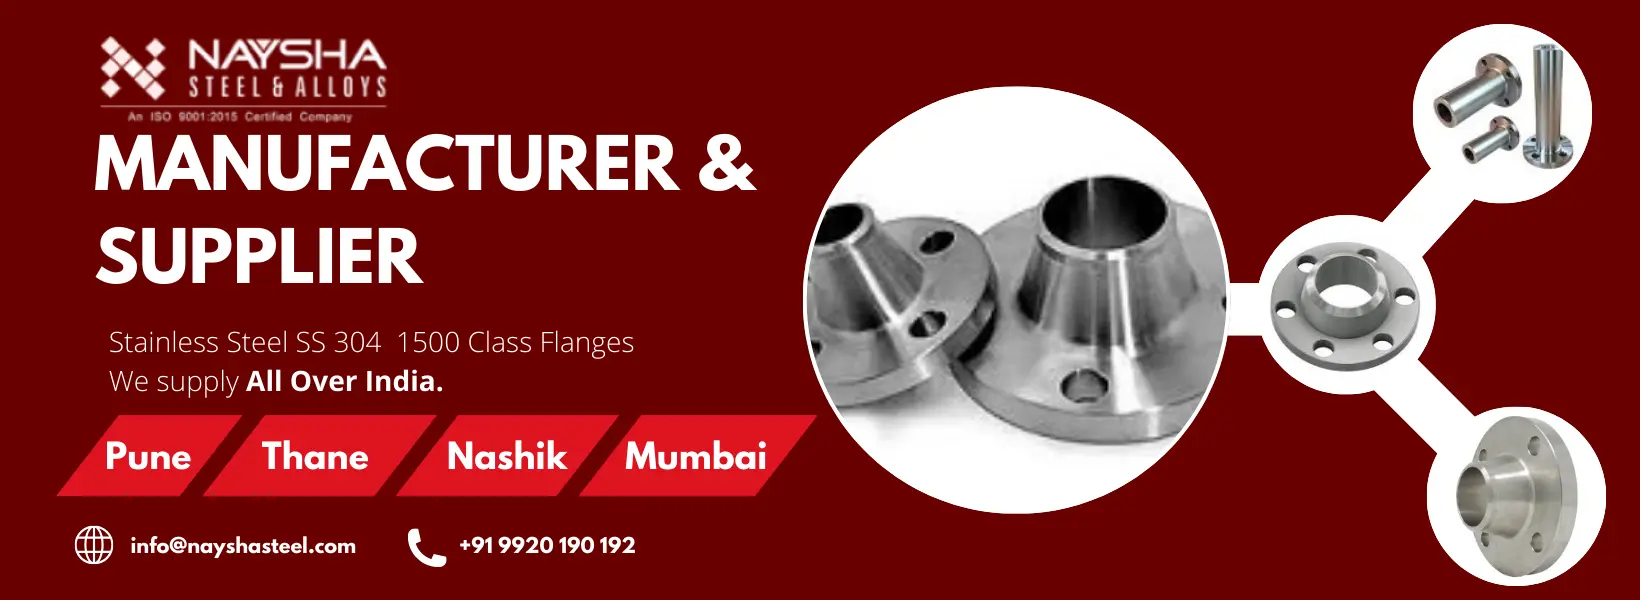 stainless steel 304 1500 class flanges banner